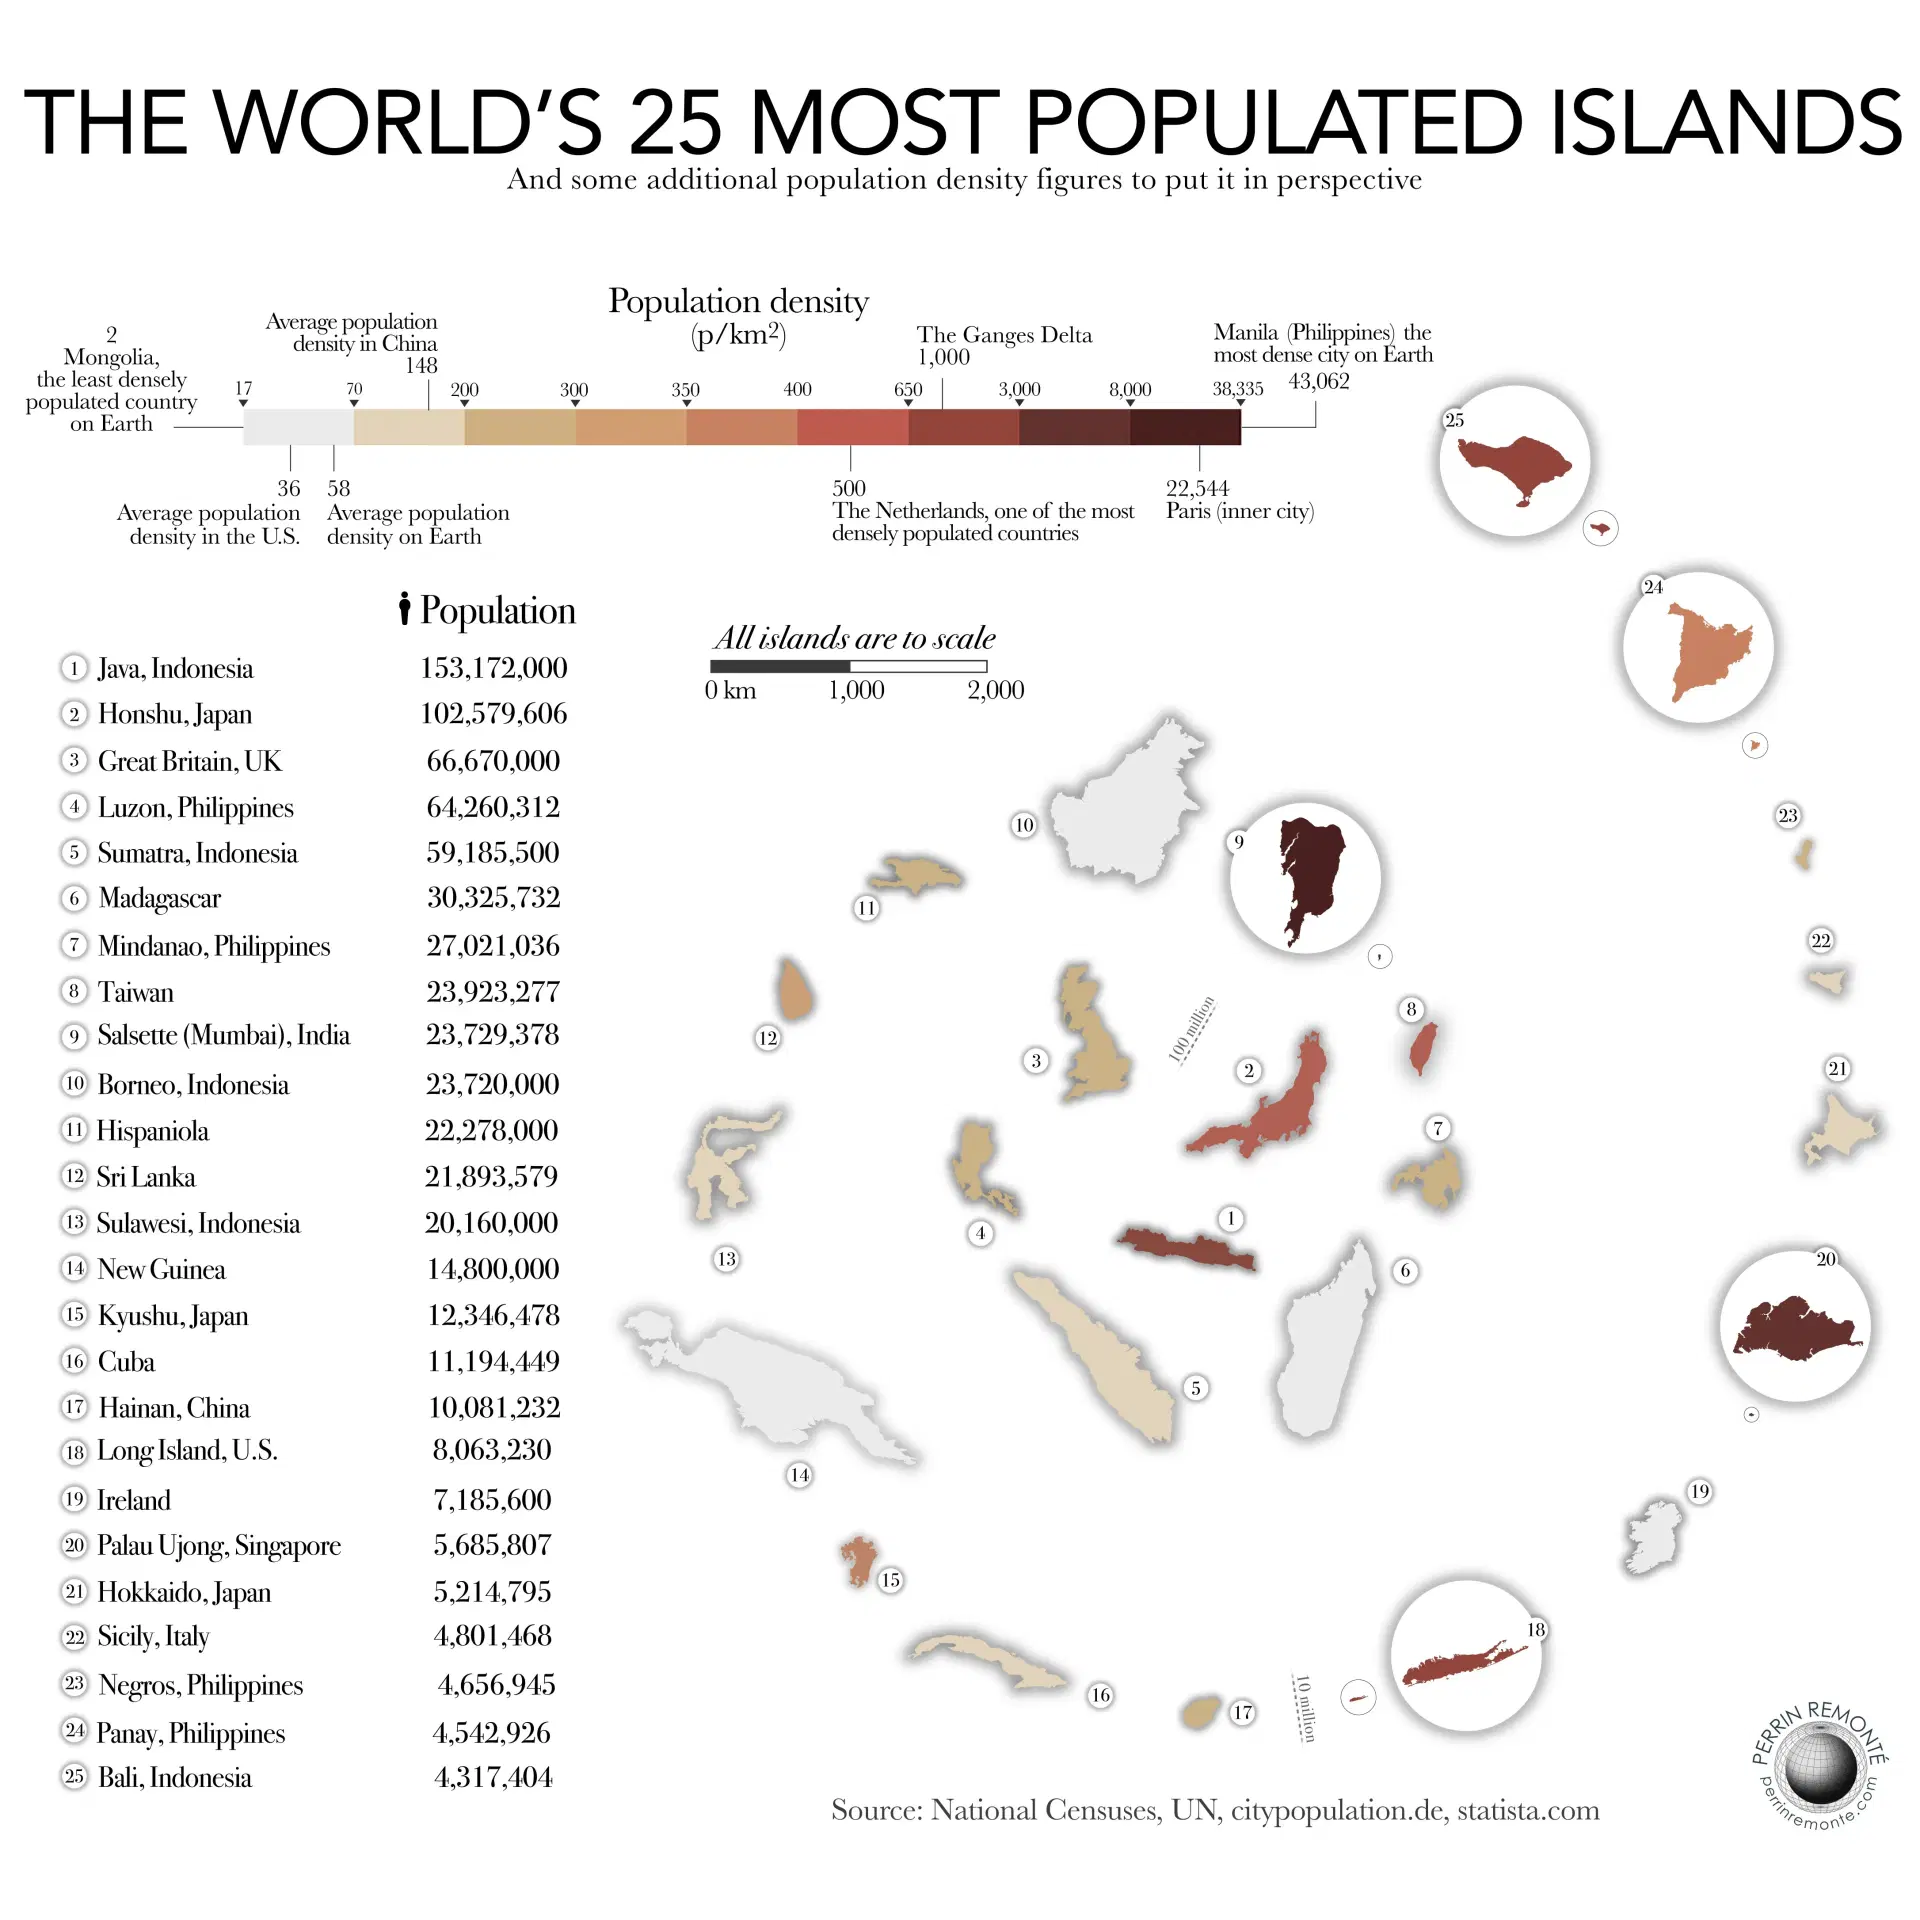 What are the World’s Most Populated Islands?